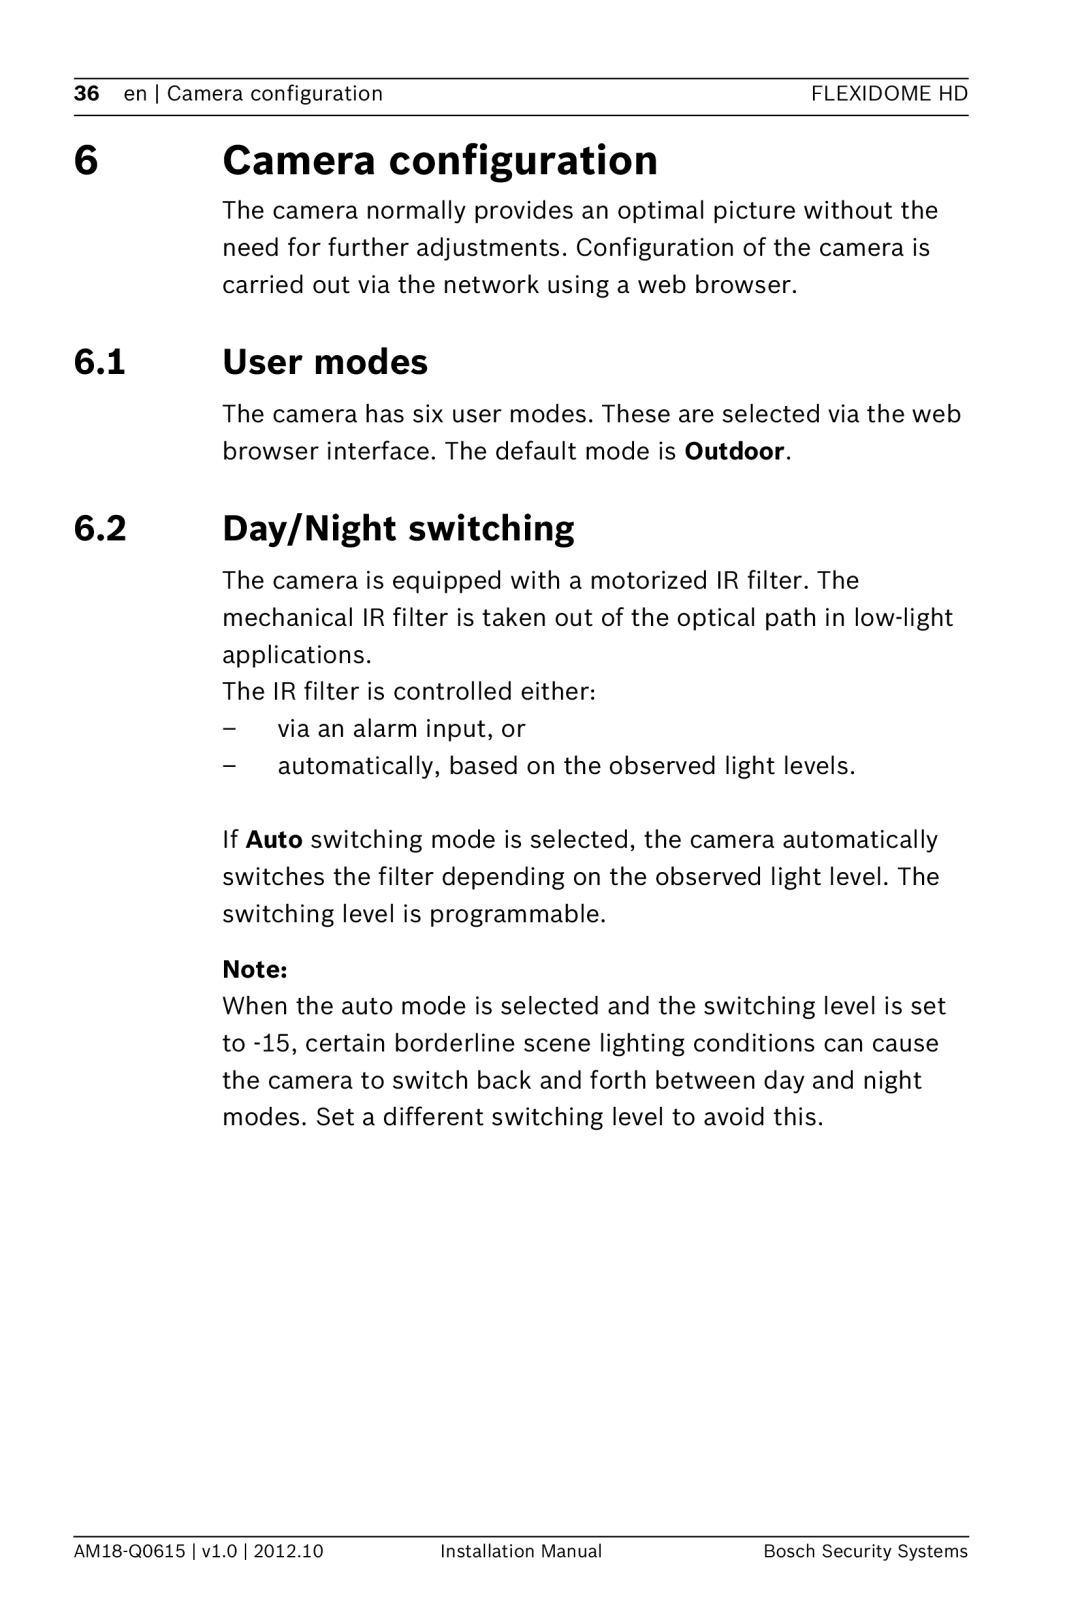 Bosch Appliances NDN-733 installation manual 6Camera configuration, 6.1User modes, 6.2Day/Night switching 